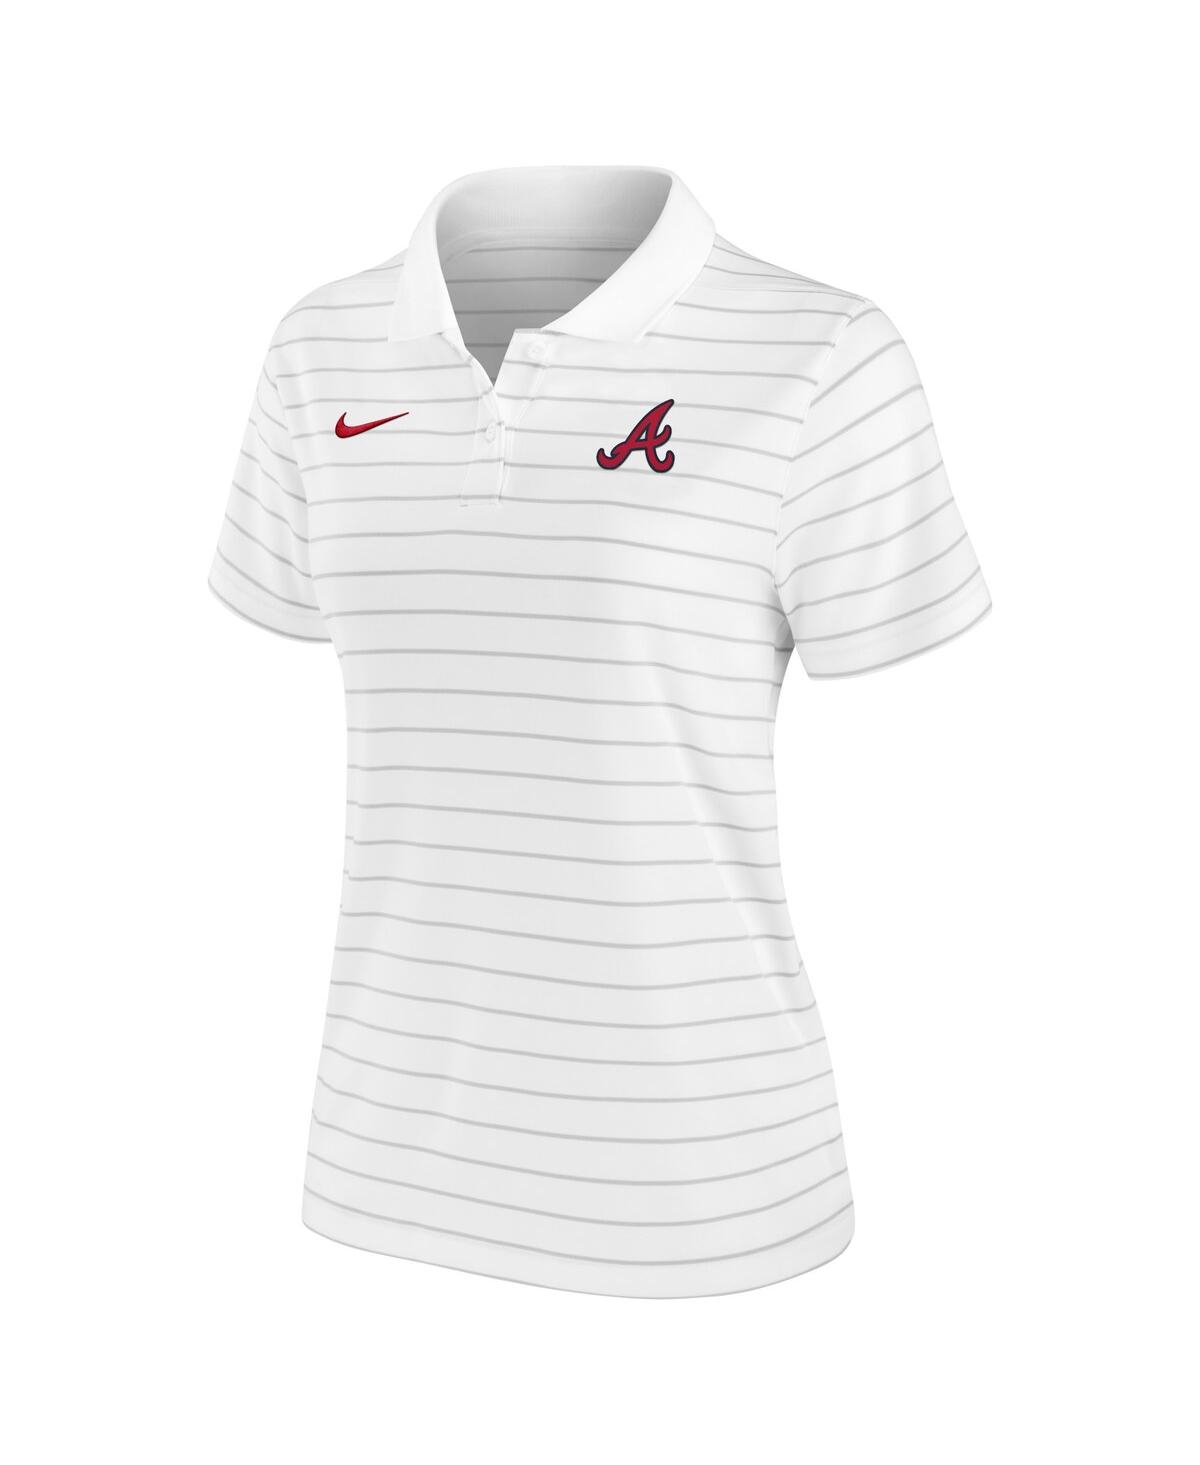 Shop Nike Women's  White Atlanta Braves Authentic Collection Victory Performance Polo Shirt